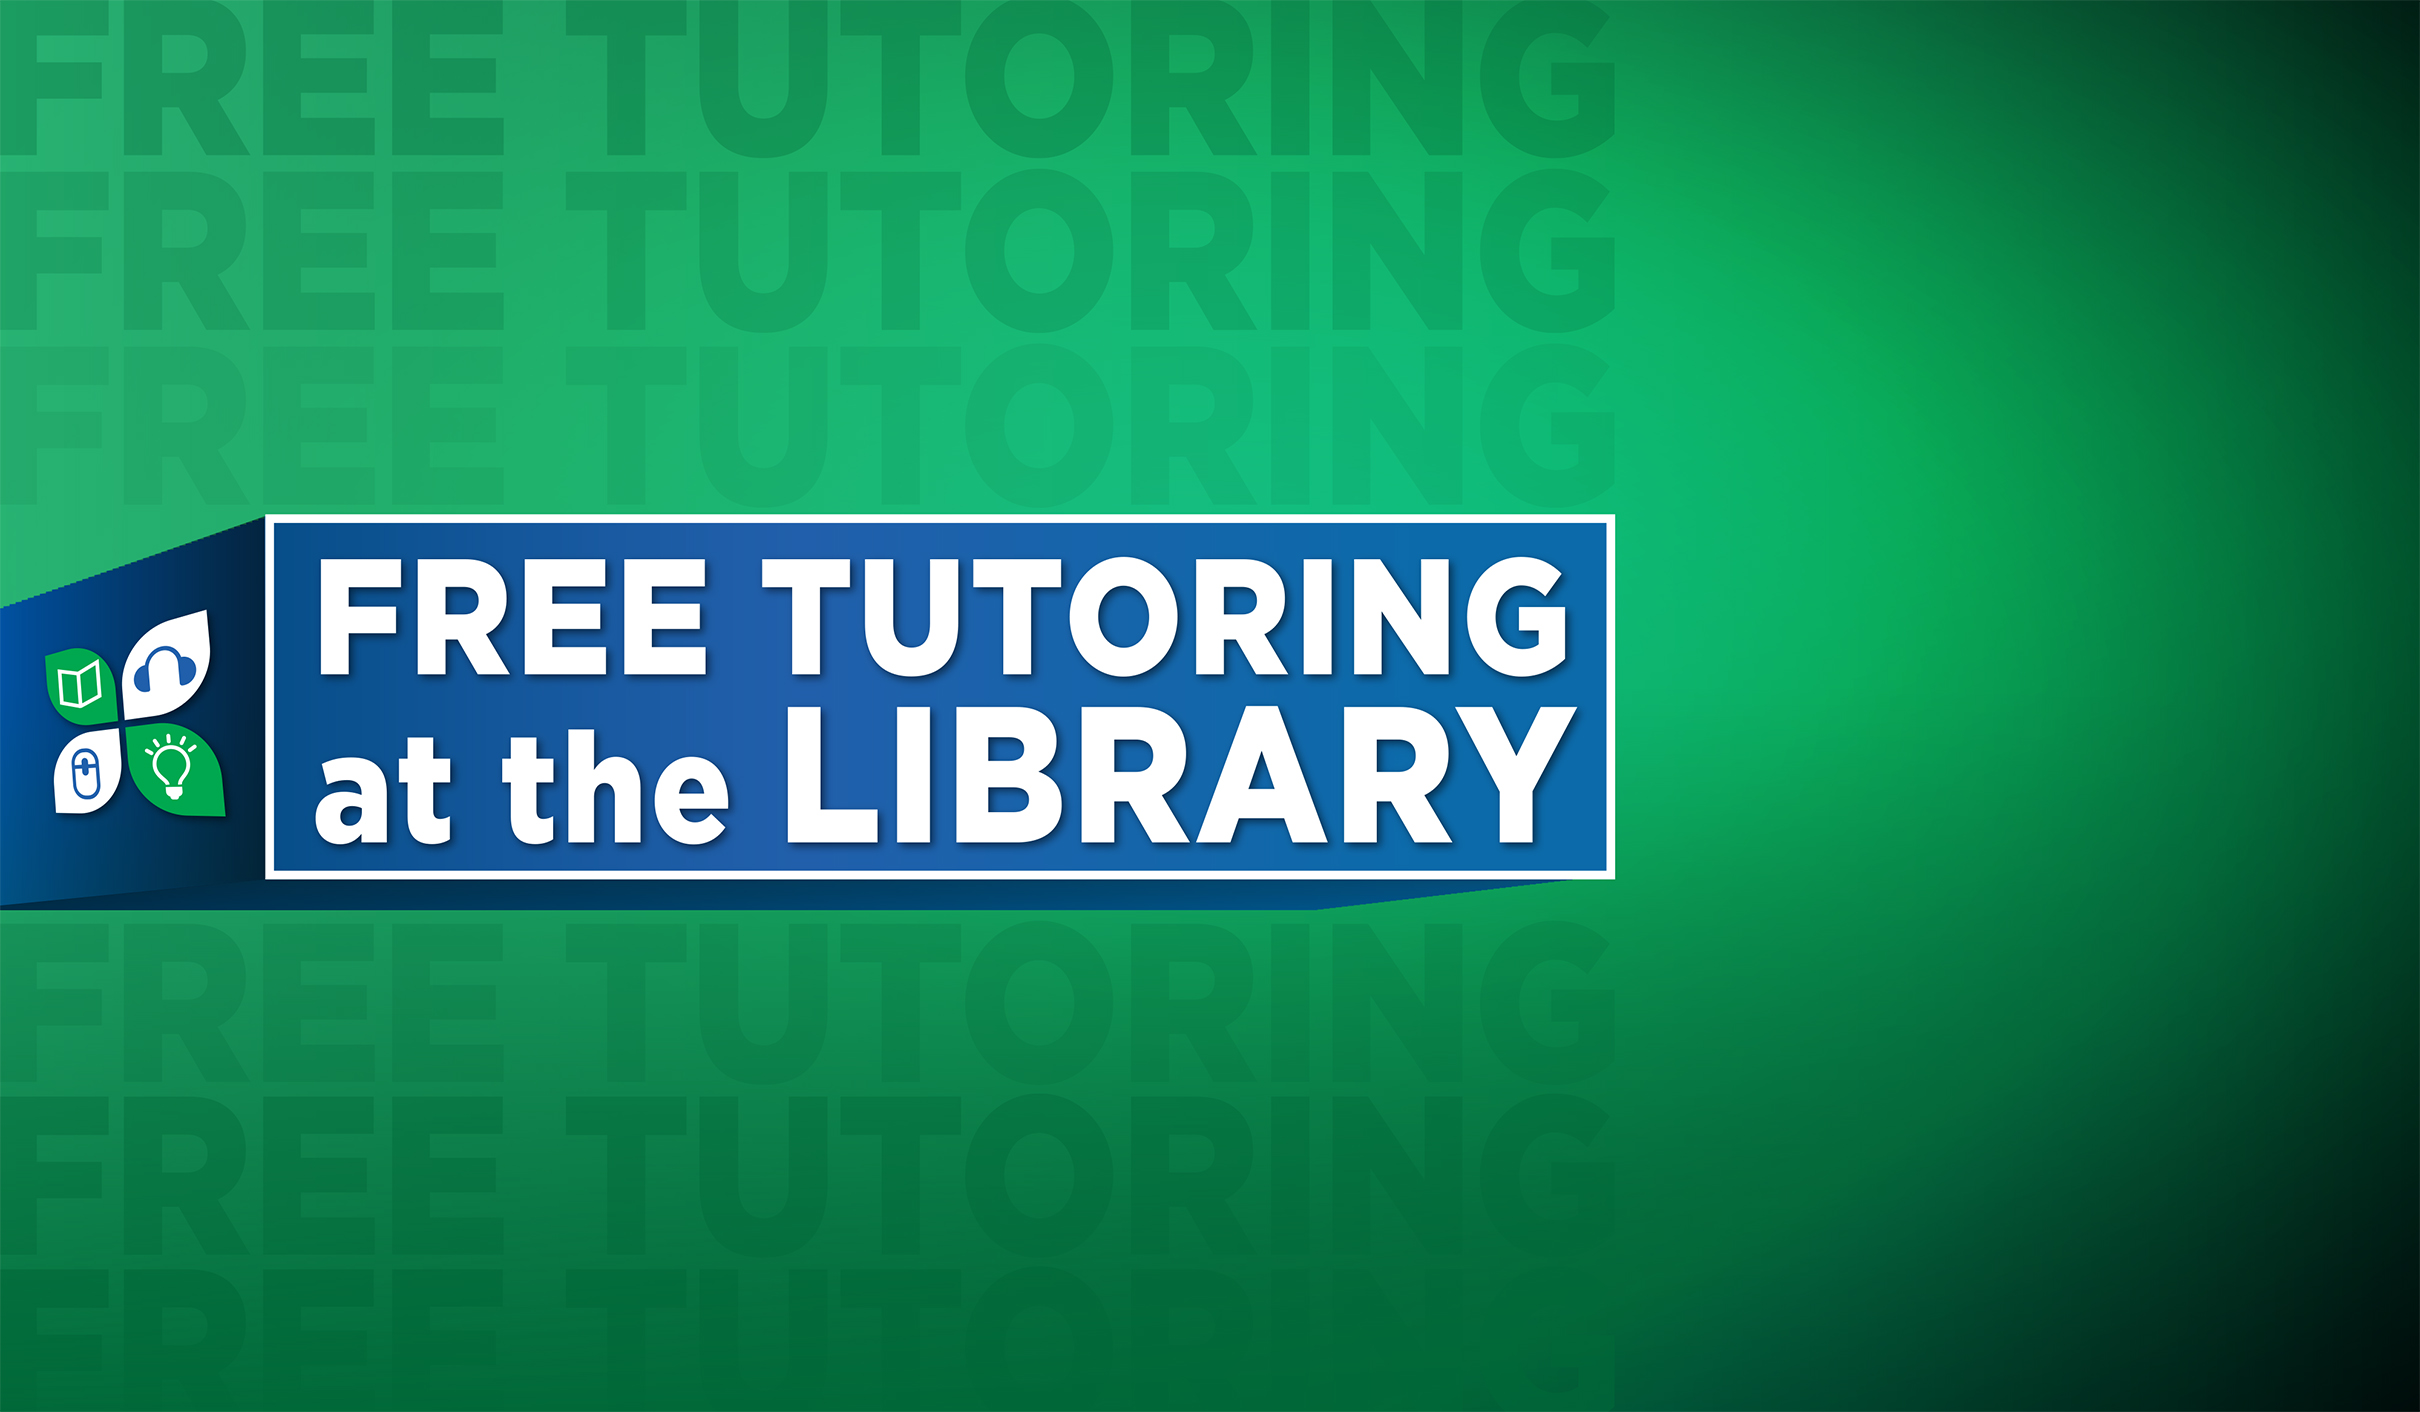 FREE Tutoring at the Library